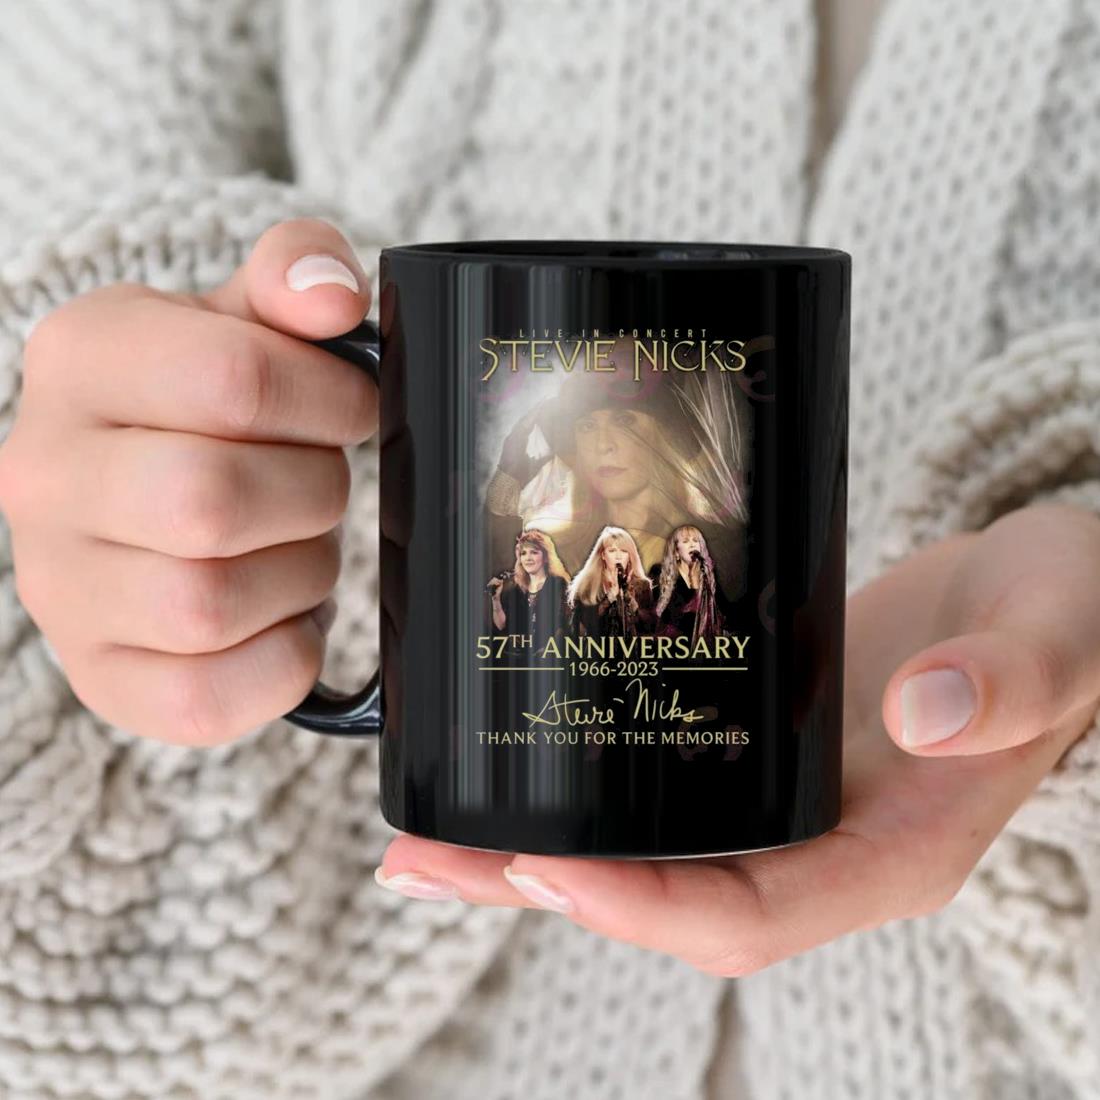 Live In Concert Stevie Nicks 57th Anniversary 1966 – 2023 Thank You For The Memories Signature Mug nhu